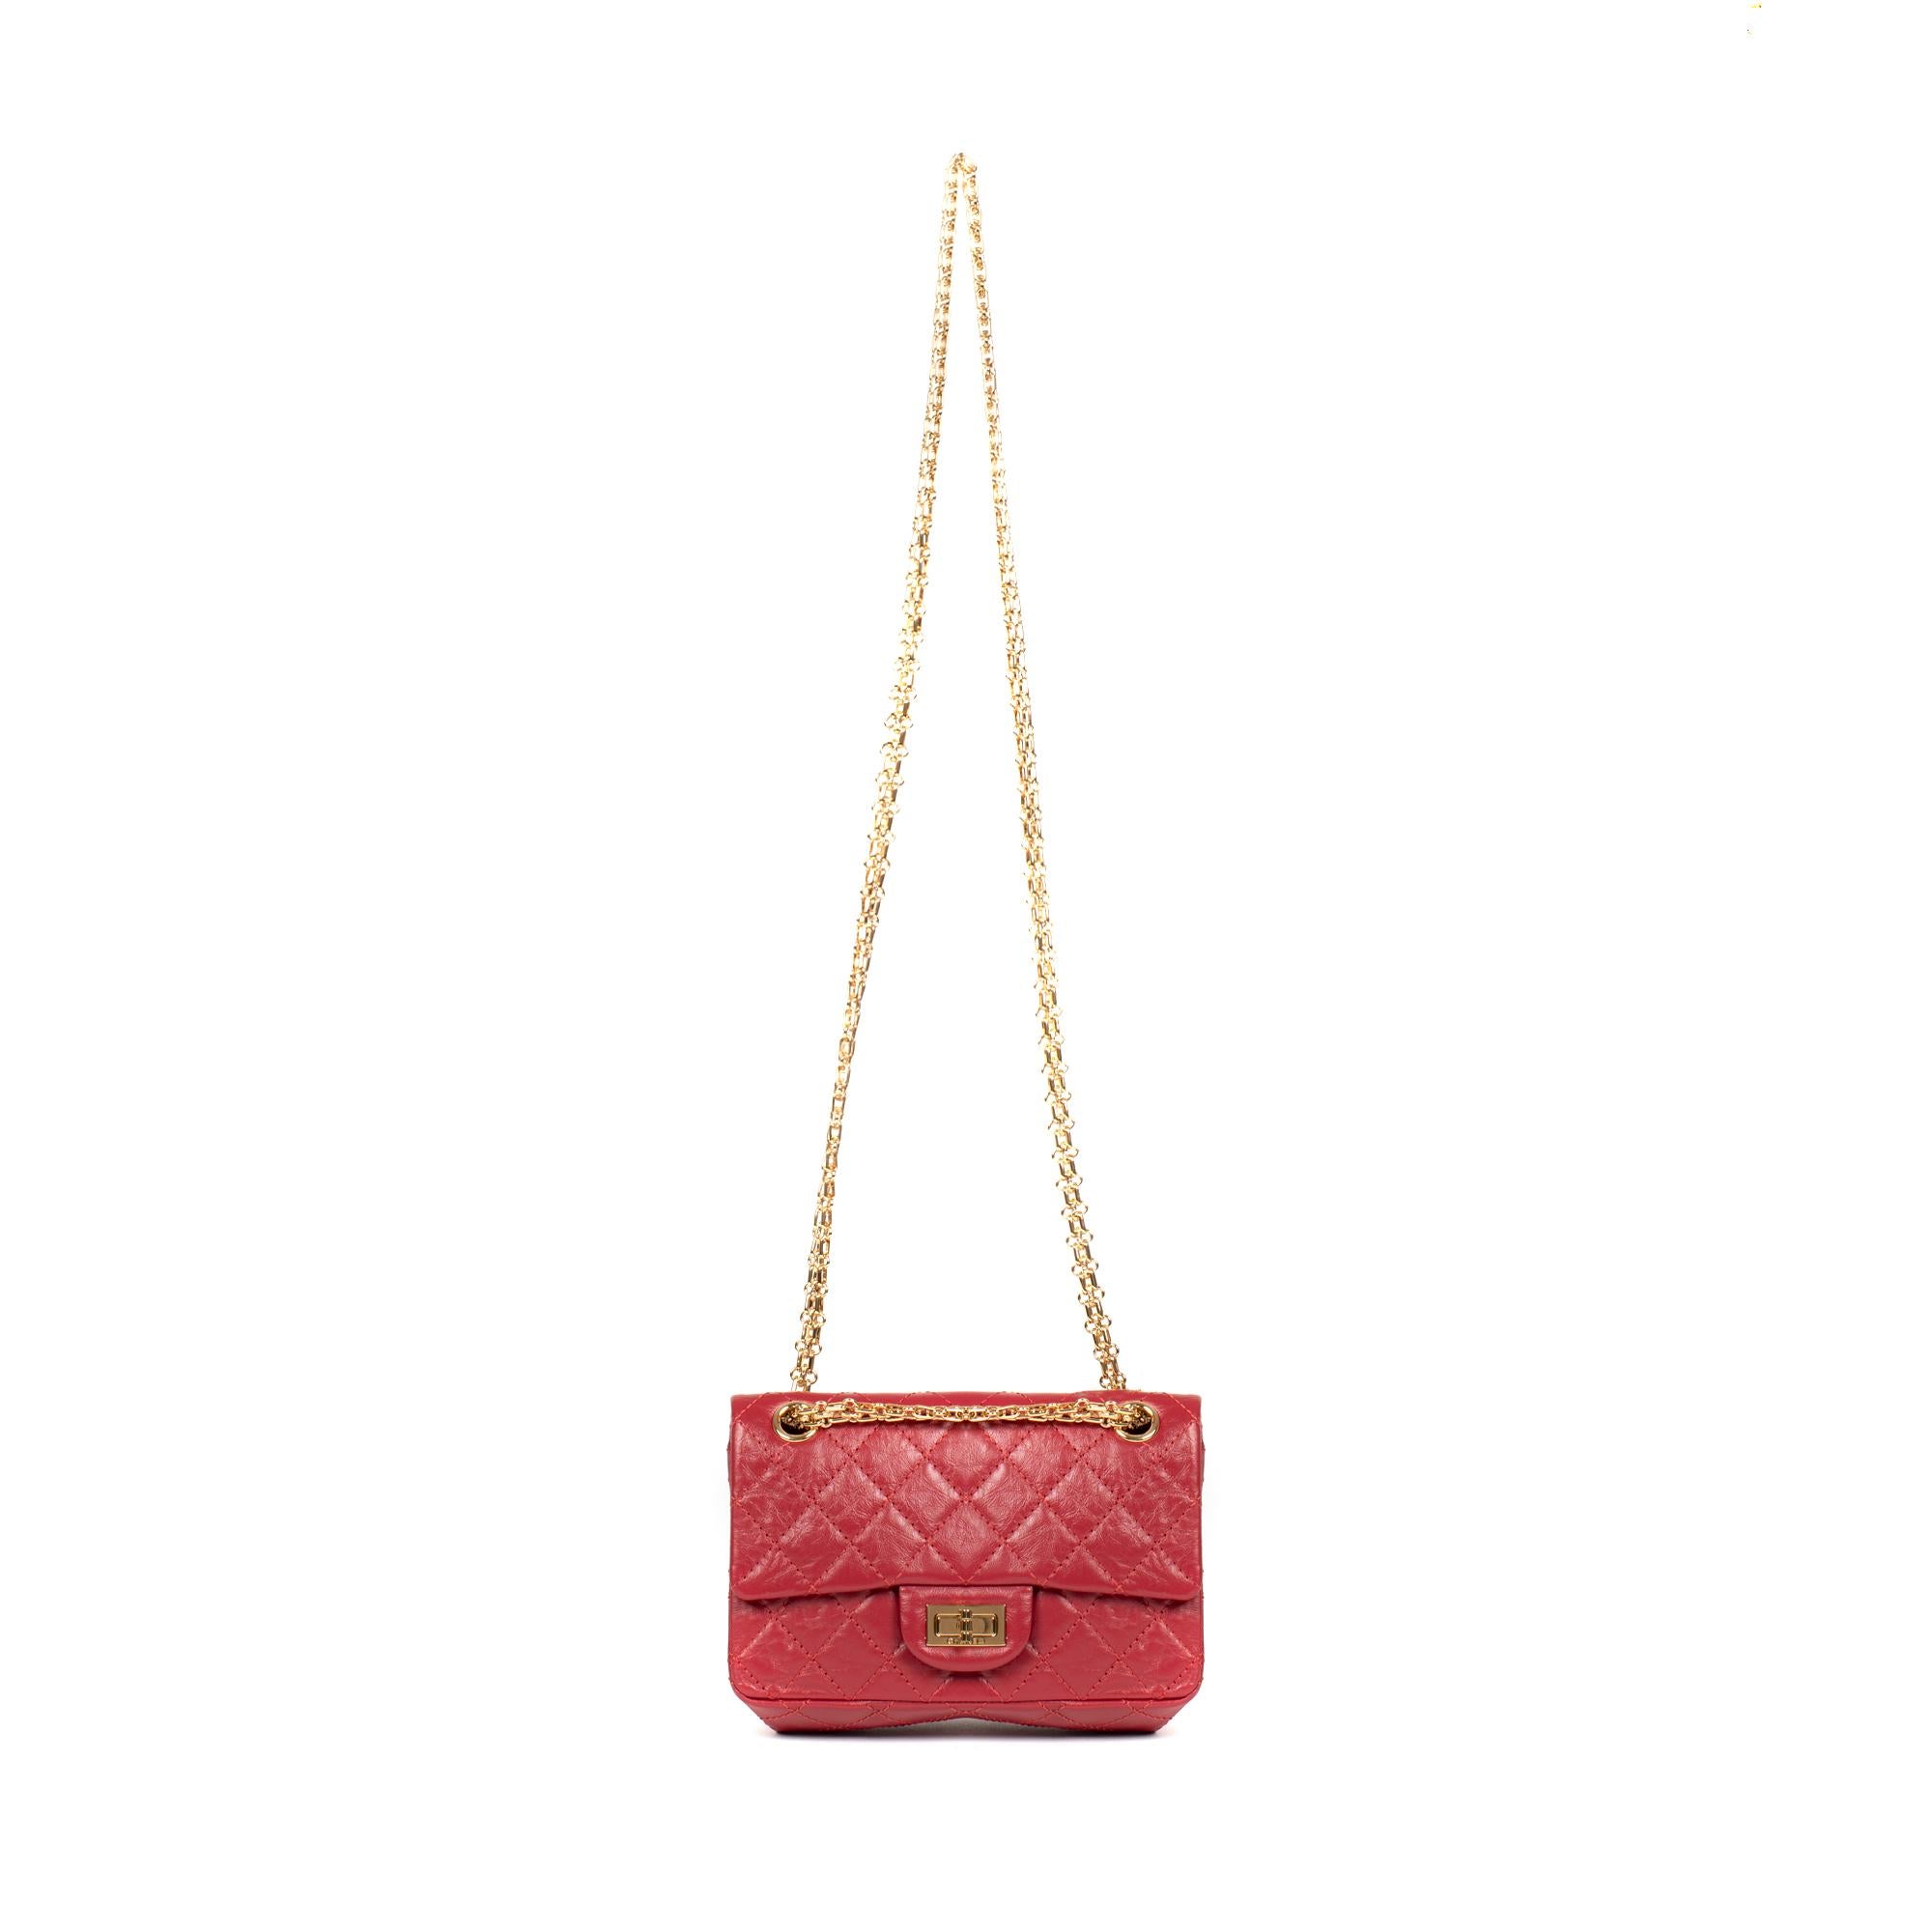 Stunning and rare jewel: Chanel 2.55 Reissue handbag in red quilted leather, shiny gilded metal trim, a signature chain handle transformable in gold metal allowing a hand or shoulder support.

